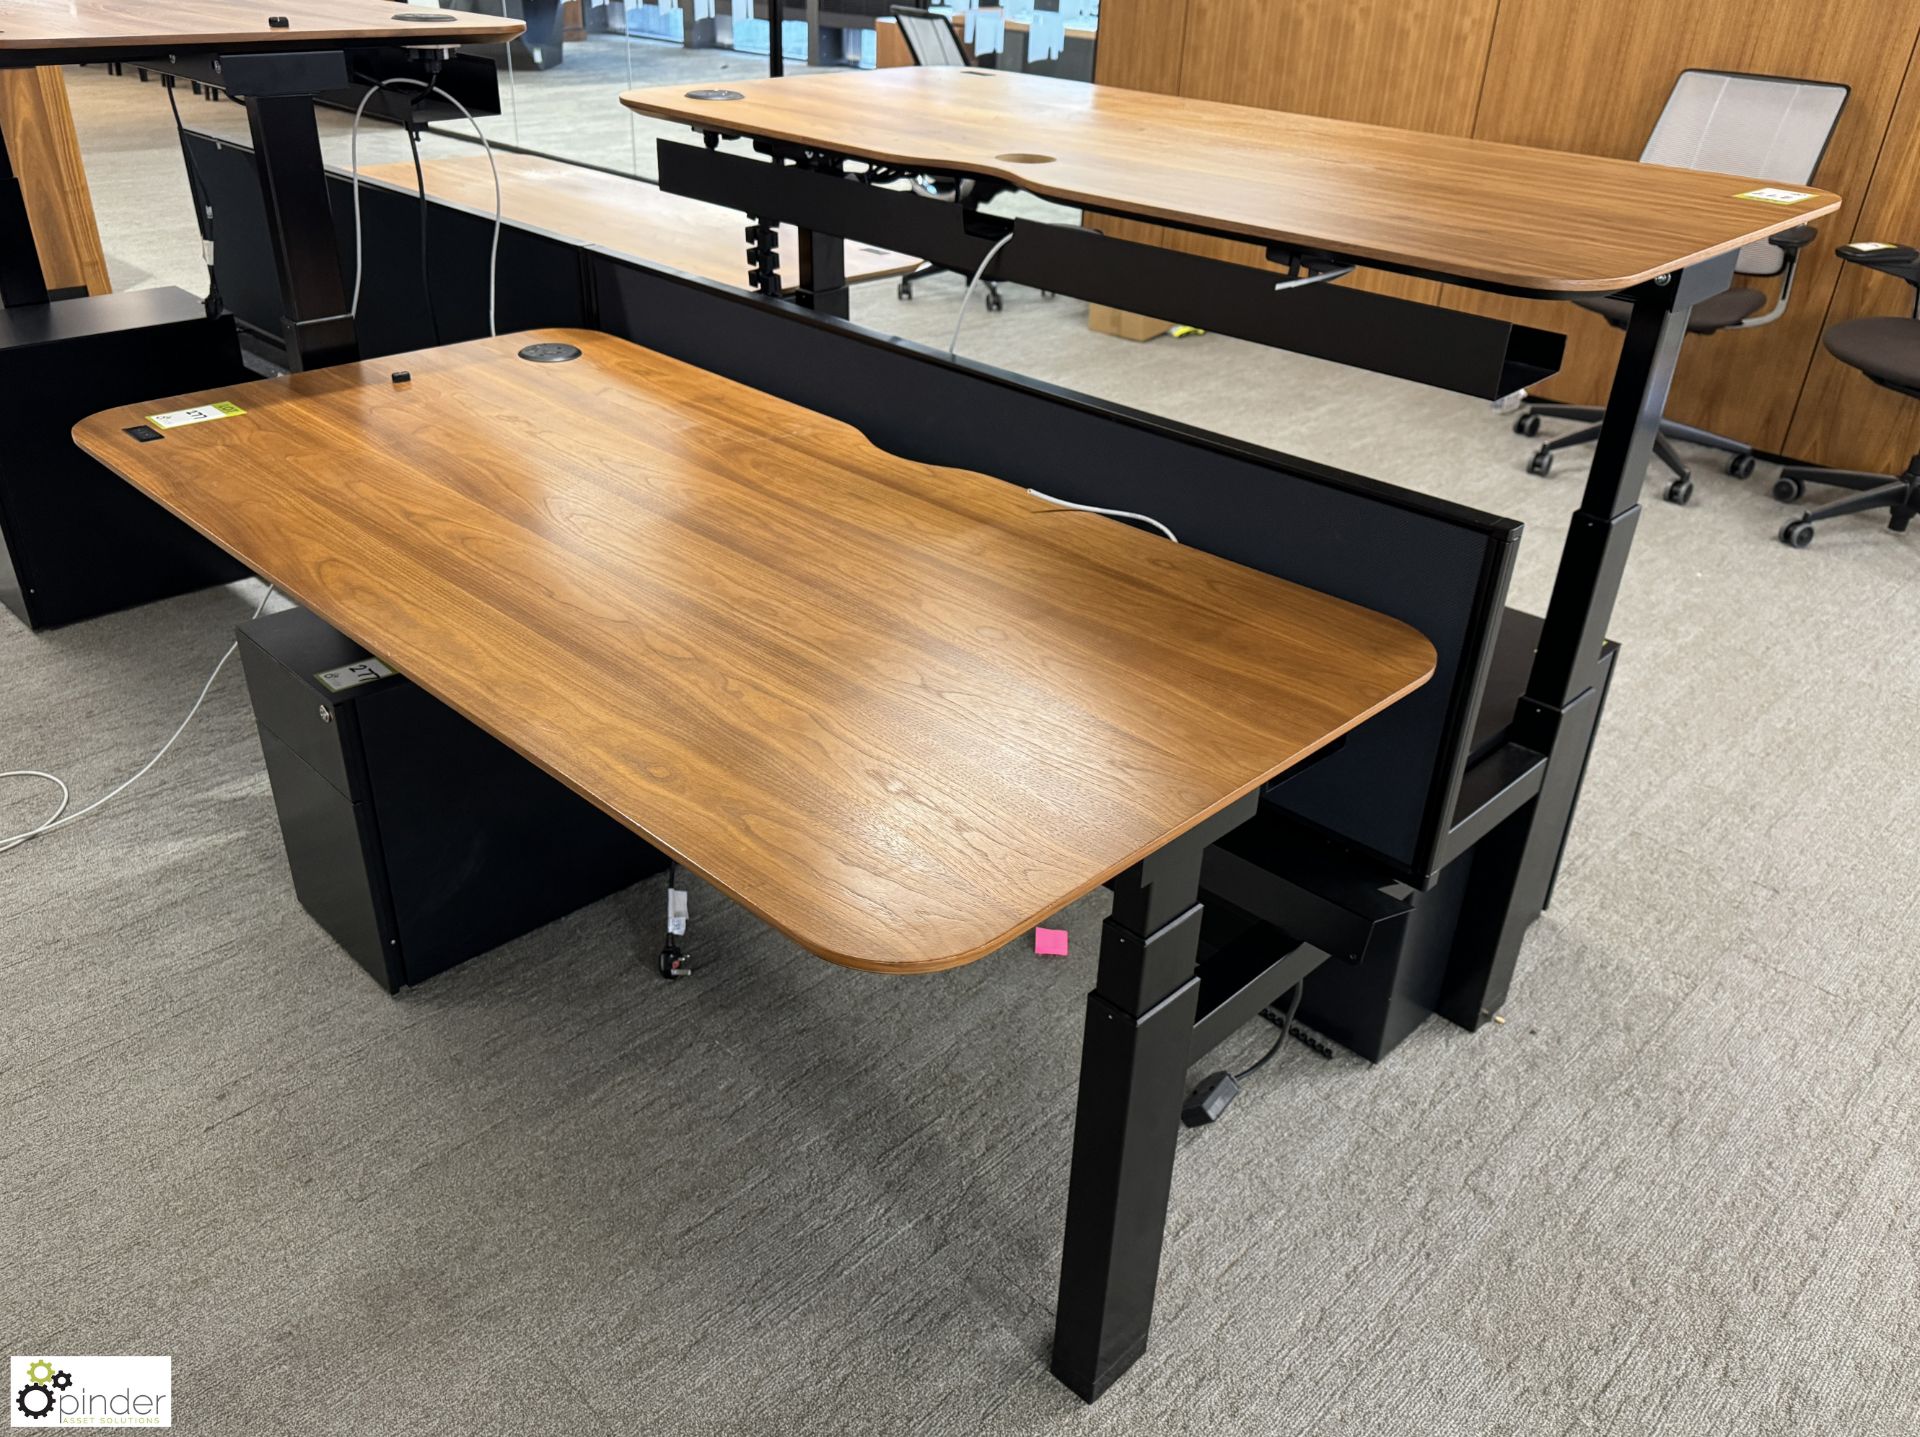 OMT back to back powered rise and fall Desks, 1600mm x 800mm per desk leaf, cherry veneer, with - Image 2 of 6